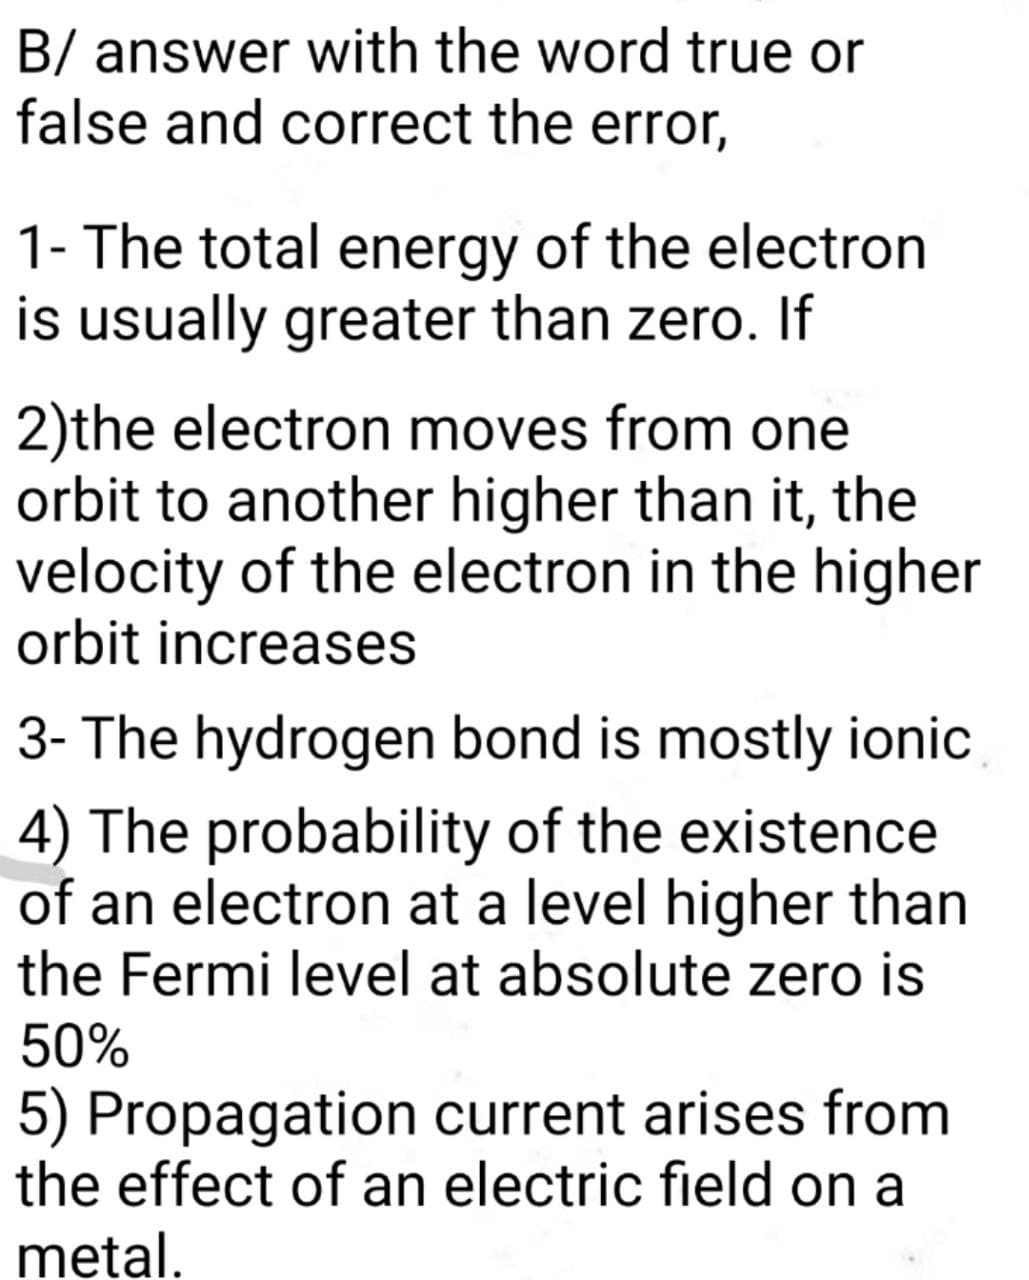 B/ answer with the word true or
false and correct the error,
1- The total energy of the electron
is usually greater than zero. If
2)the electron moves from one
orbit to another higher than it, the
velocity of the electron in the higher
orbit increases
3- The hydrogen bond is mostly ionic
4) The probability of the existence
of an electron at a level higher than
the Fermi level at absolute zero is
50%
5) Propagation current arises from
the effect of an electric field on a
metal.
